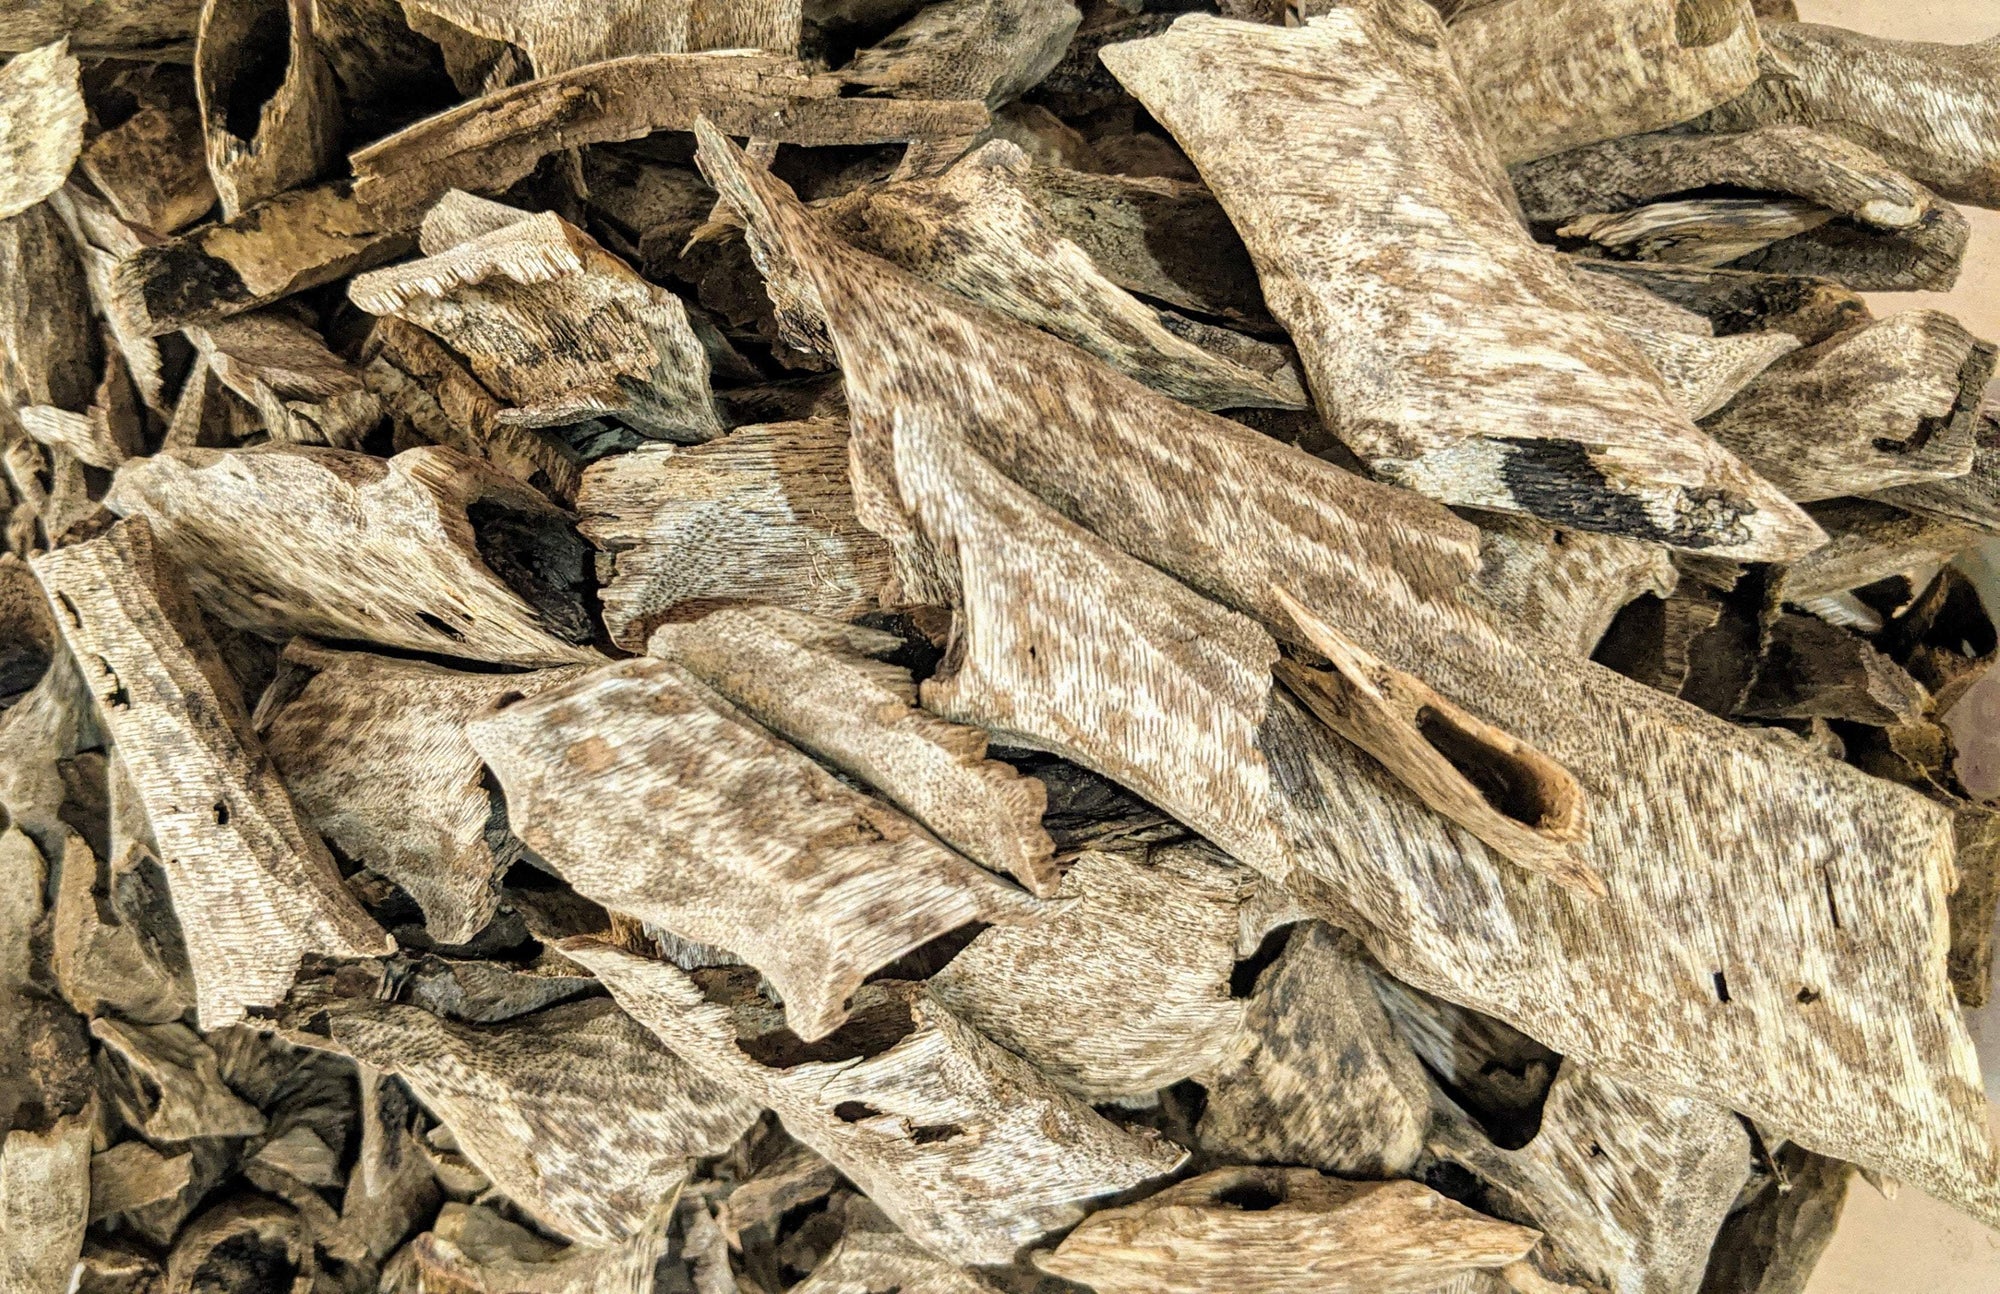 The Great Karma - Cultivated Vietnamese Agarwood - grown and developed by a monk -